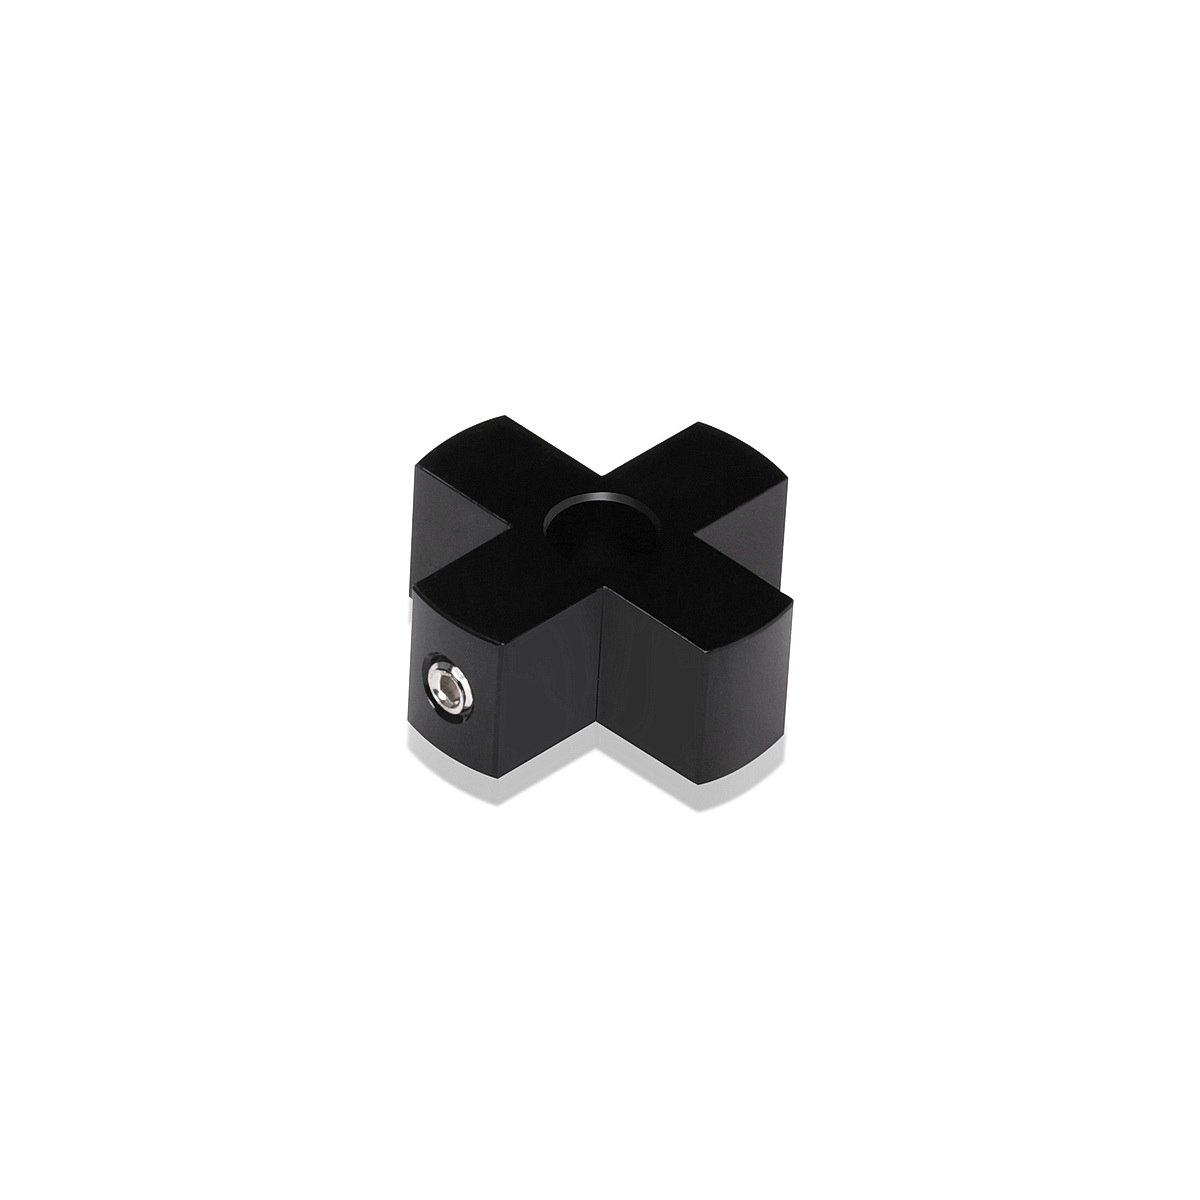 4-Way Standoffs Hub, Diameter: 1 1/4'', Thickness: 1/2'', Black Anodized Aluminum [Required Material Hole Size: 7/16'']